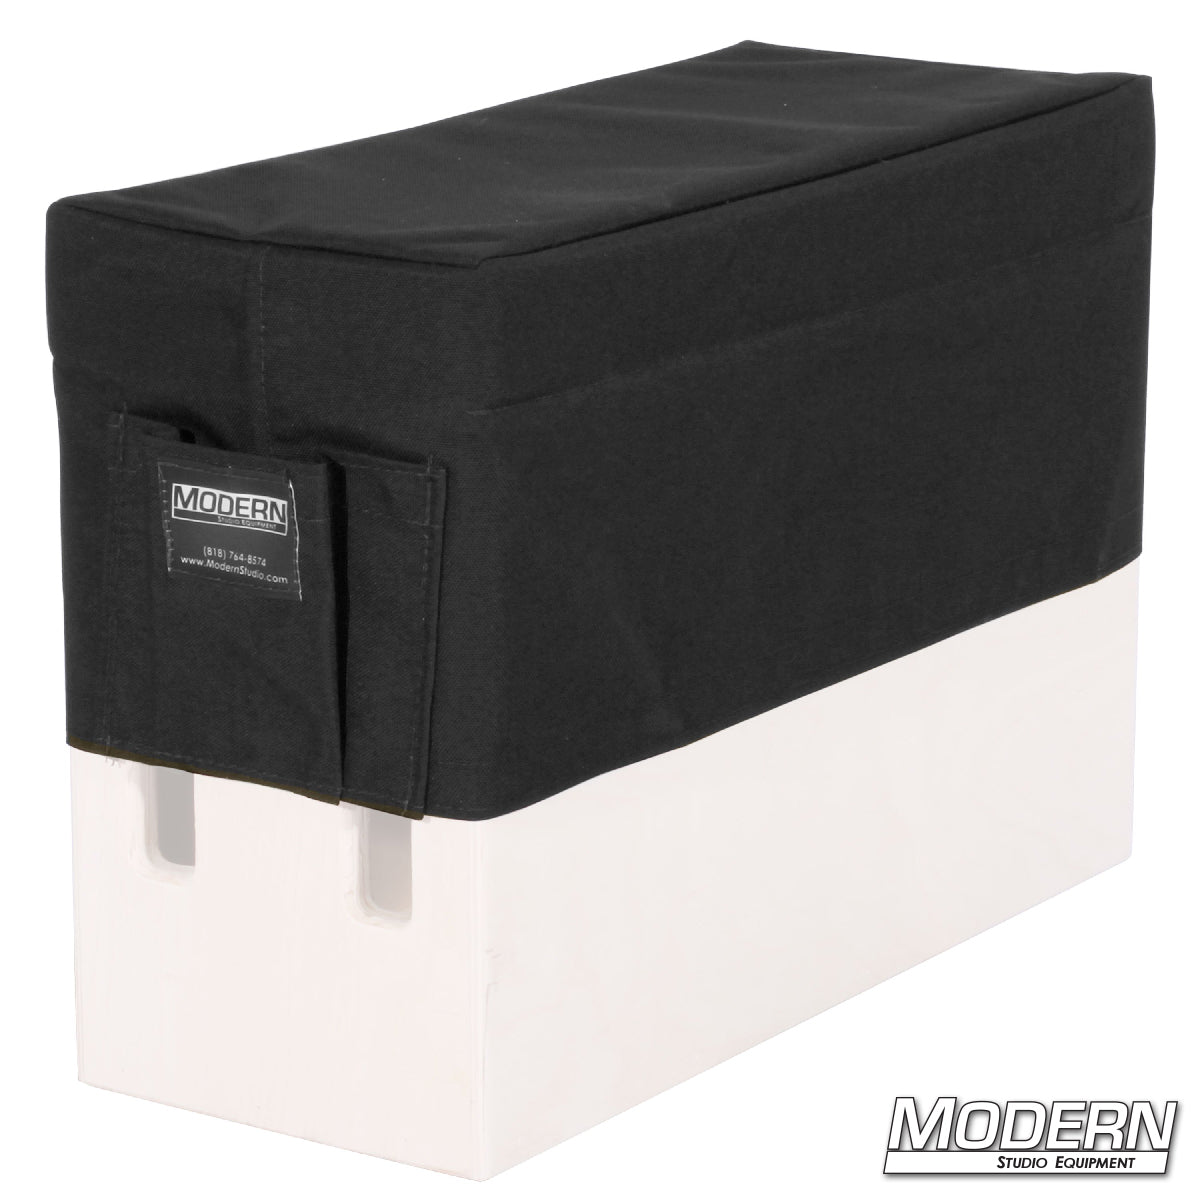 Horizontal Apple Box Seat Covers with Pocket